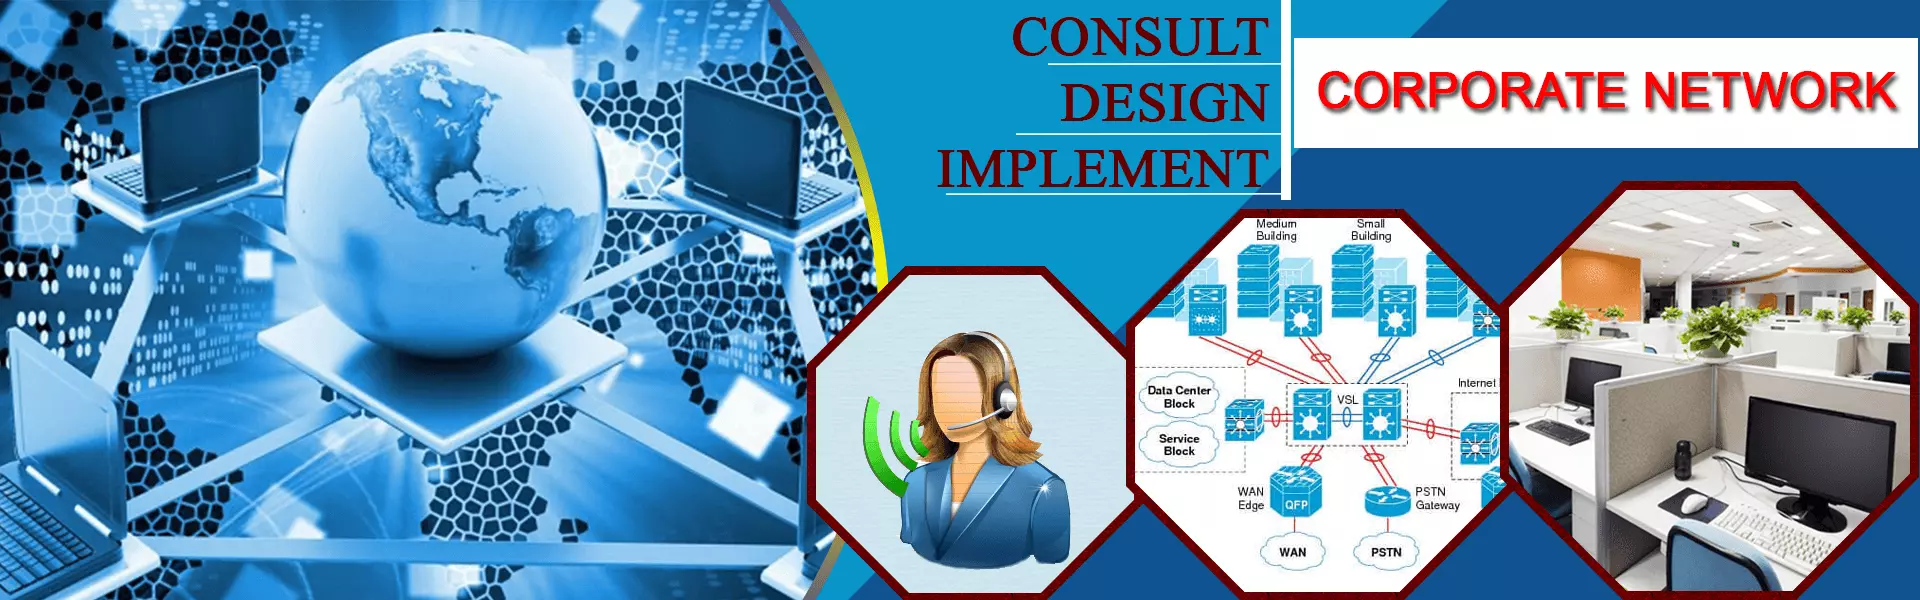 Consult, design and implement corporate network